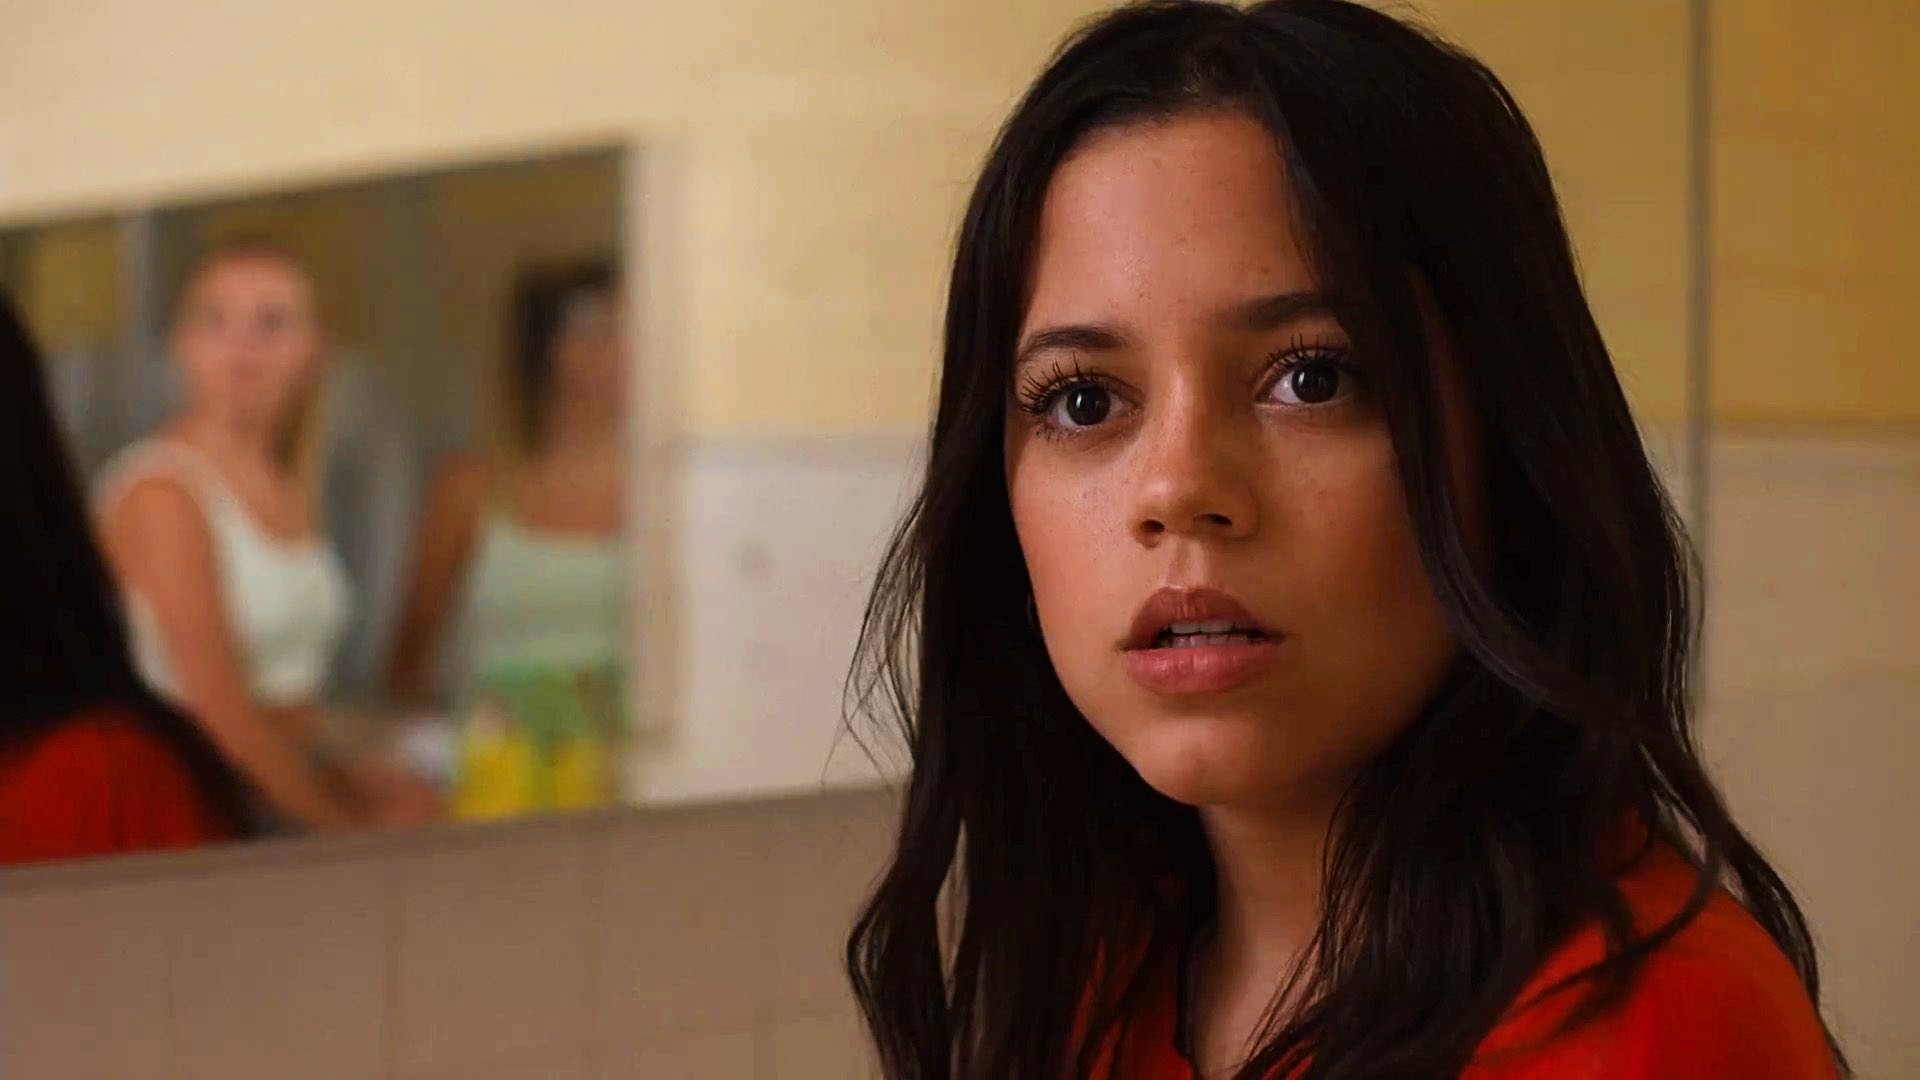 Jenna Ortega Has A New Movie At 1 On Streaming And Audiences Are Loving It